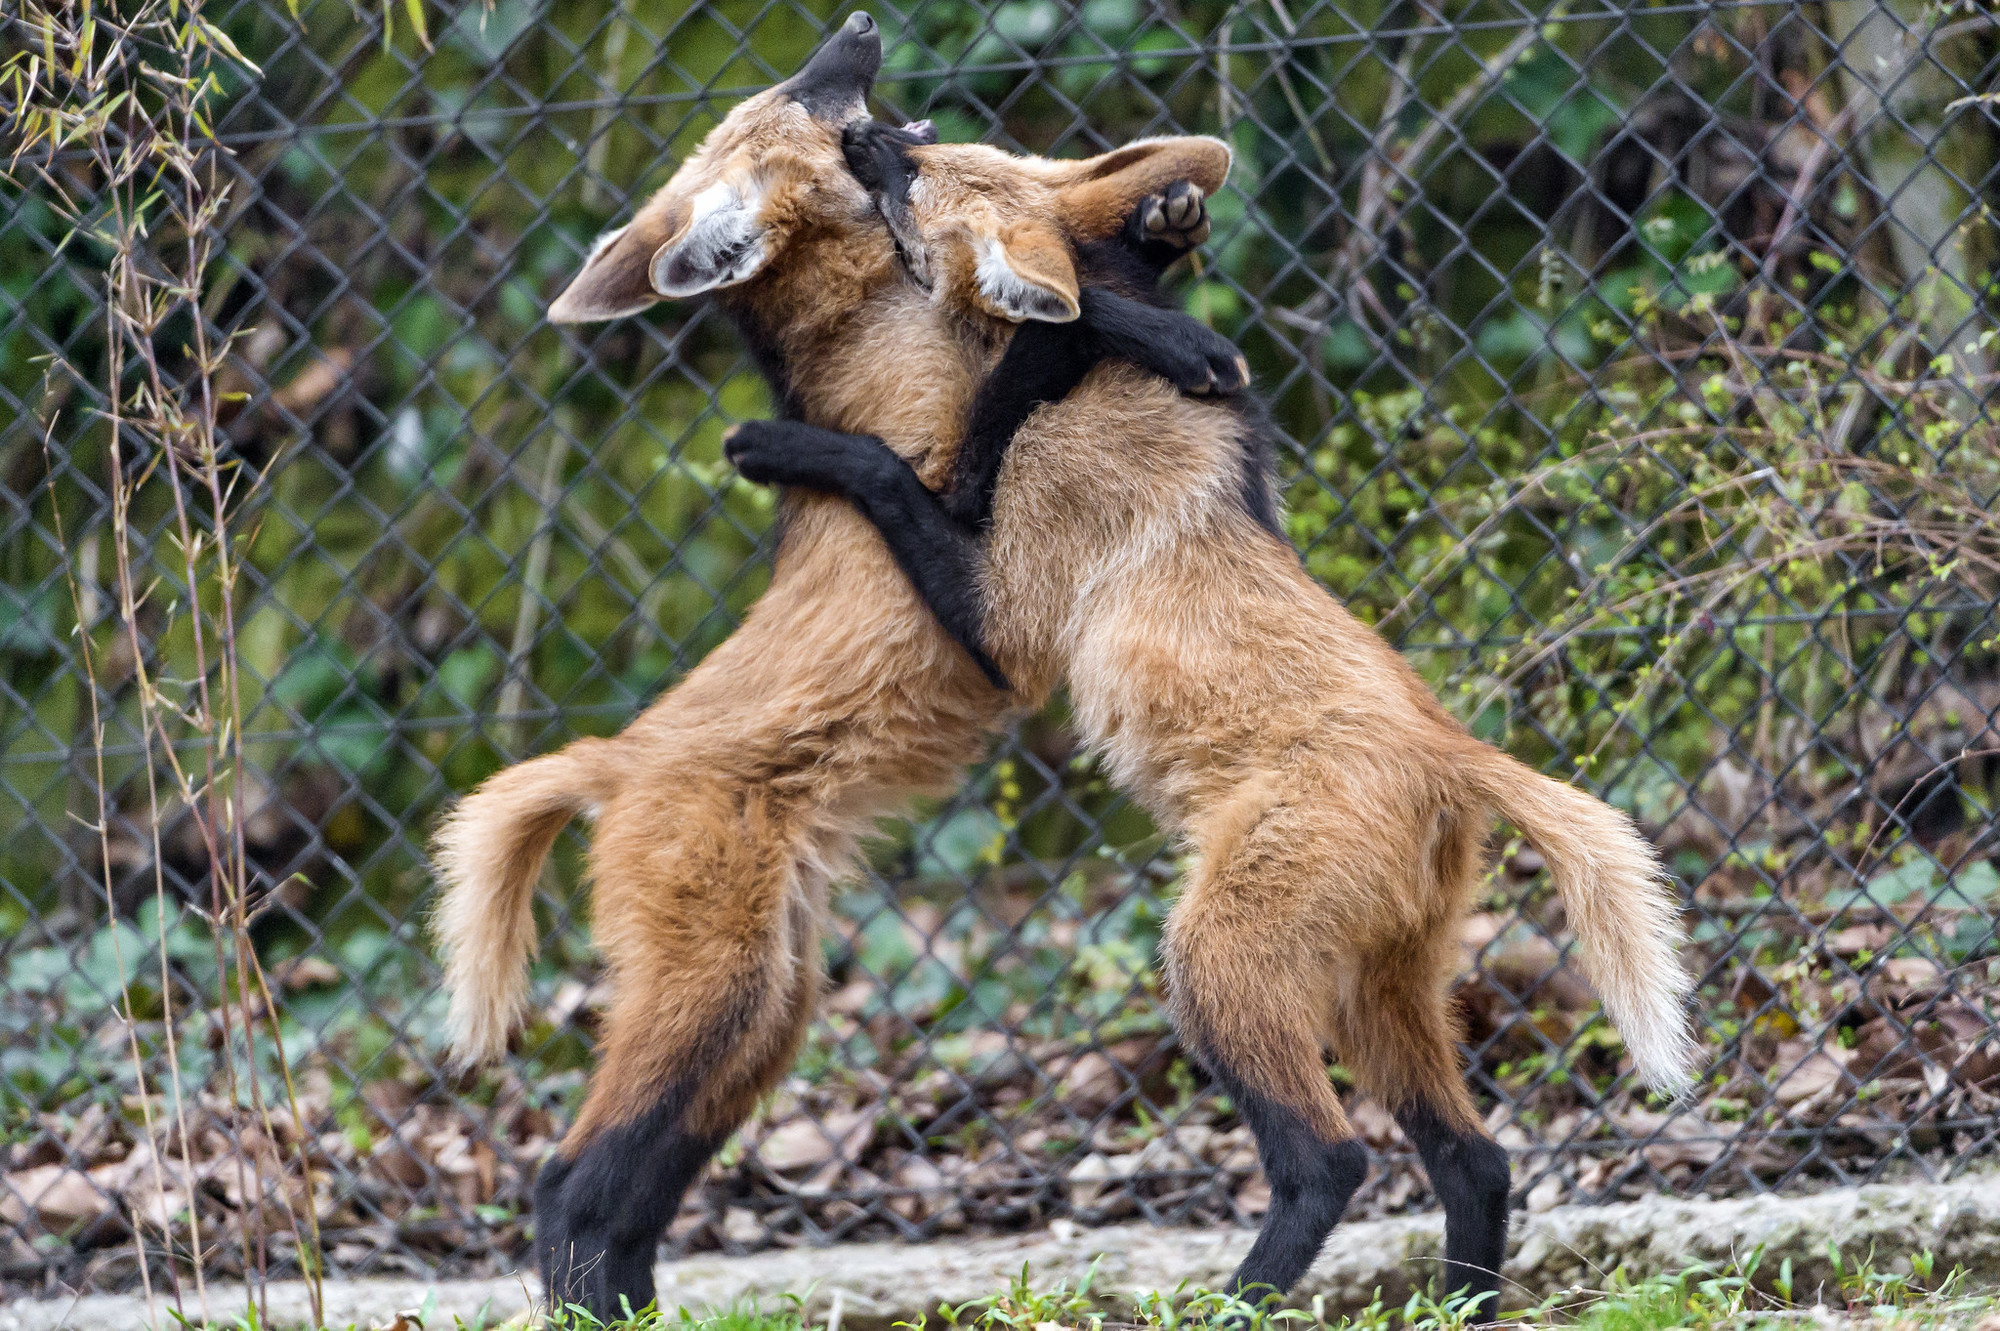 Maned wolves are mainly found in grasslands in South America and are characterized by reddish brown to golden orange sides, long, black legs, and a black mane. They are sometimes called by their nickname, "skunk wolf."